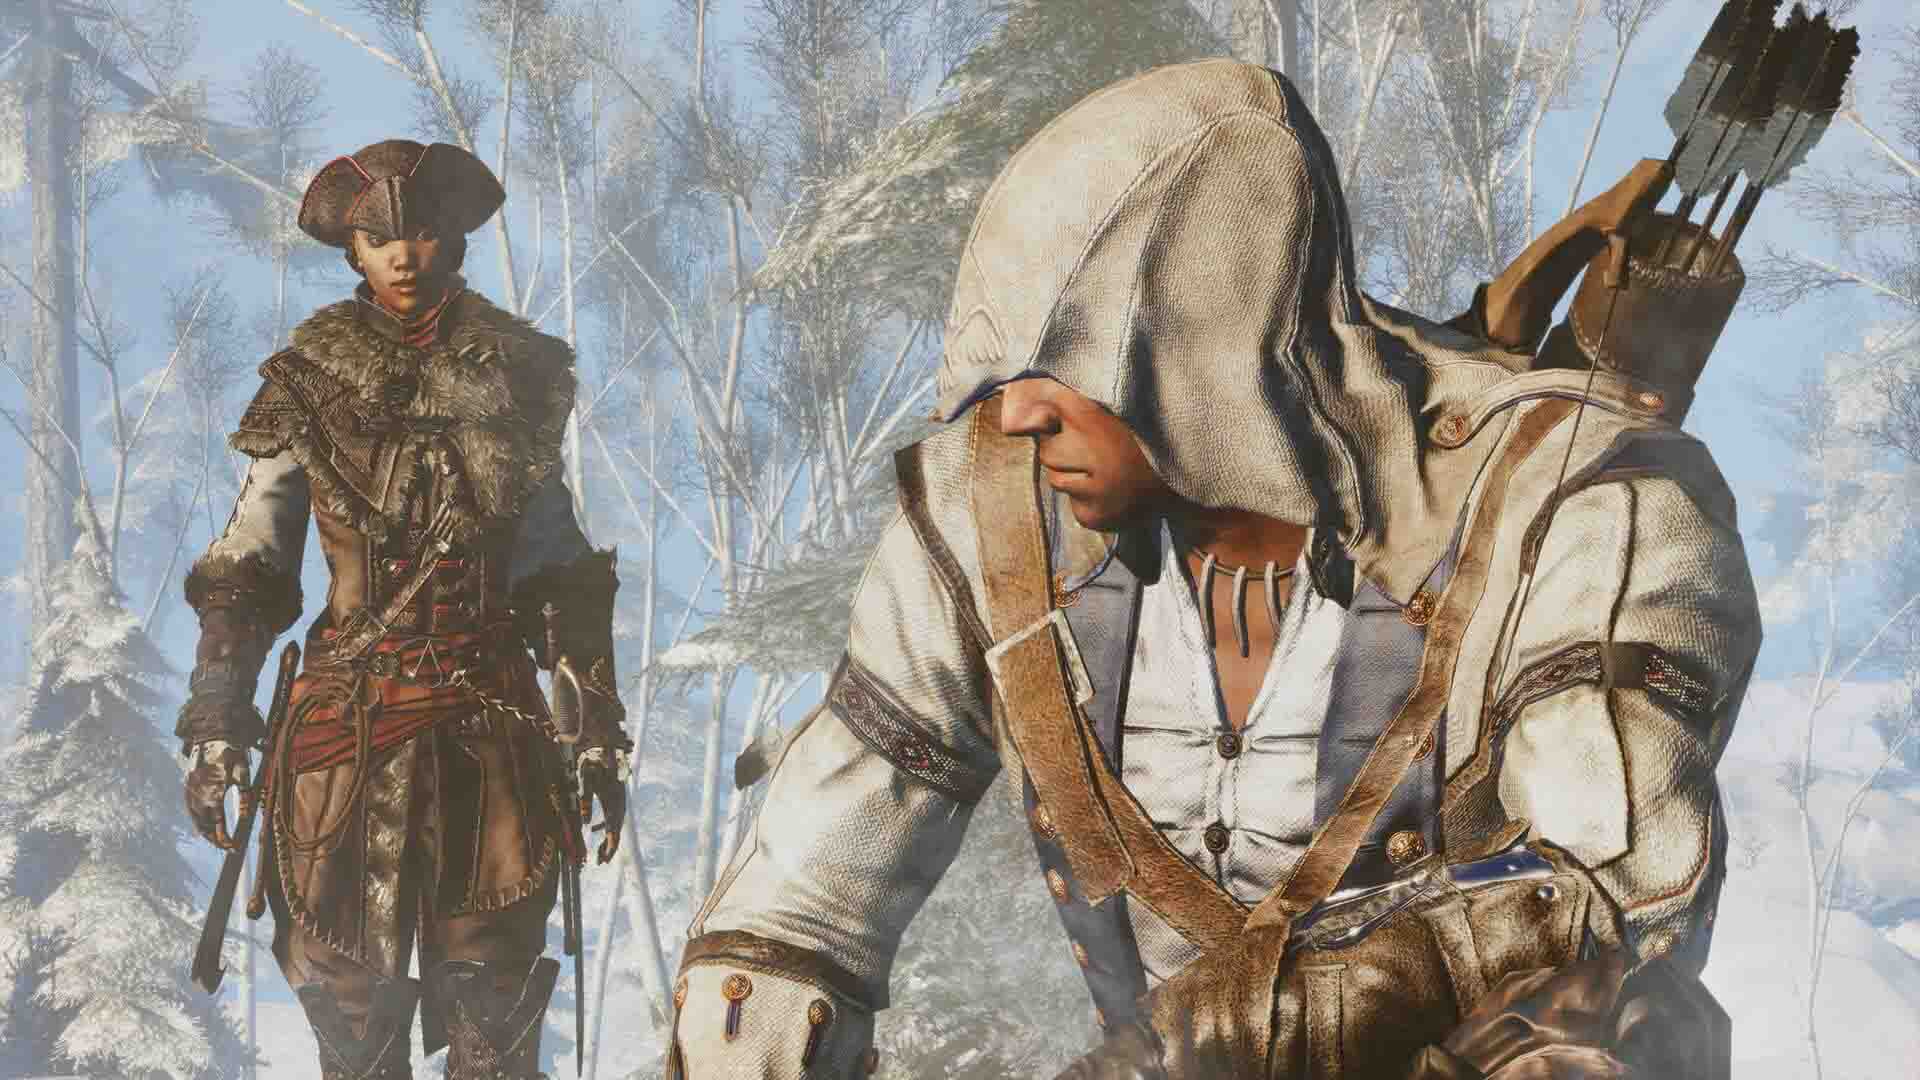 Assassin's Creed® III System Requirements for PC Games minimum, recommended specifications for Windows, CPU, OS, Processor, RAM Memory, Storage, and GPU.